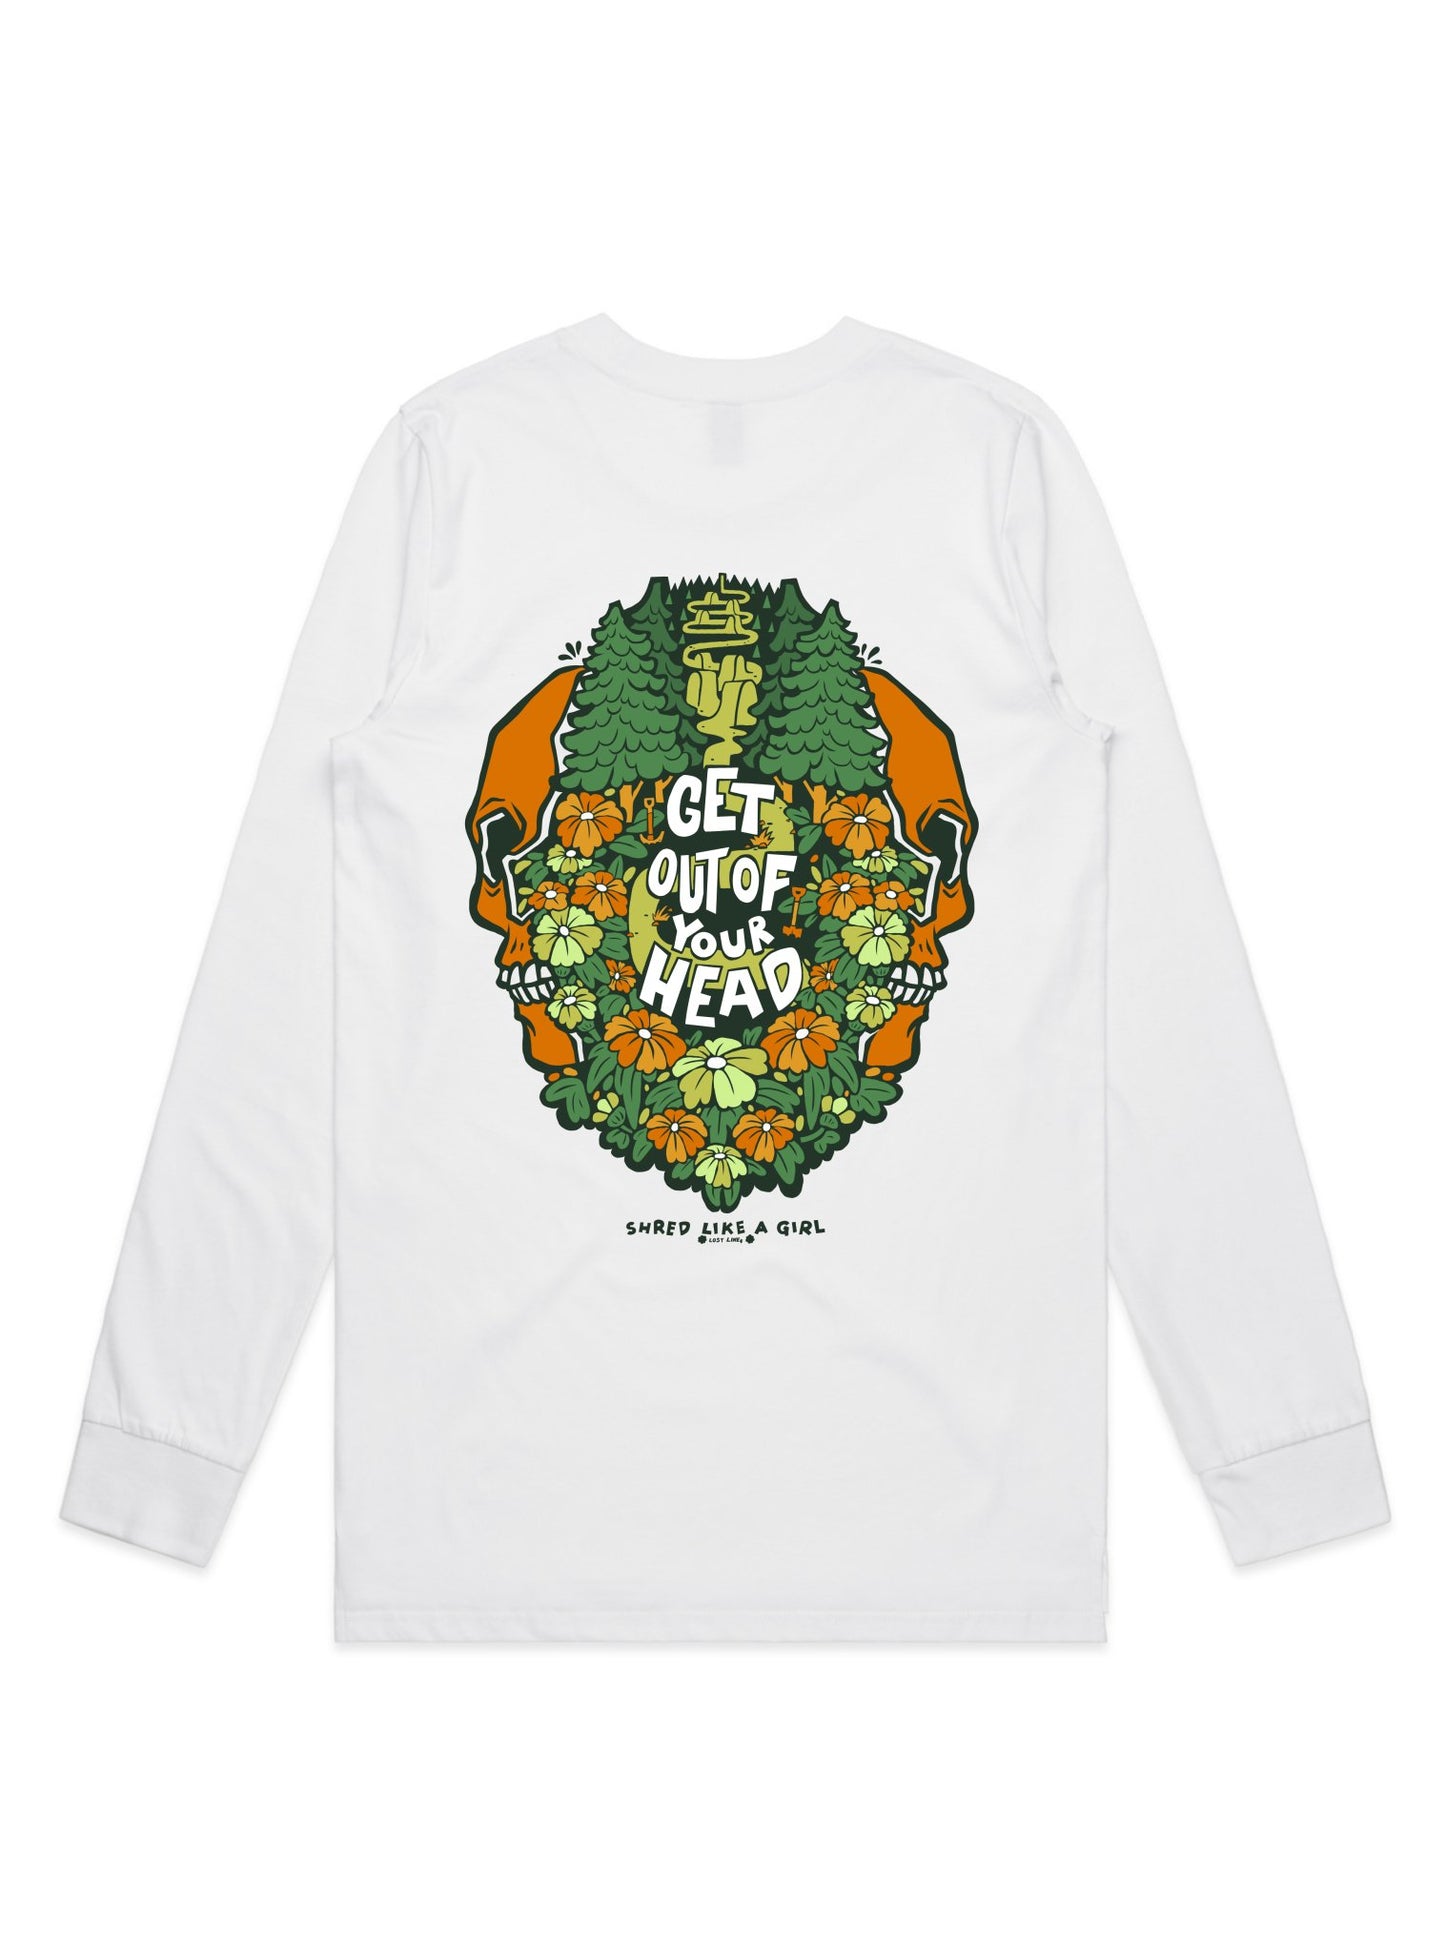 Get out of your Head Long Sleeve Tee - Shred Like a Girl